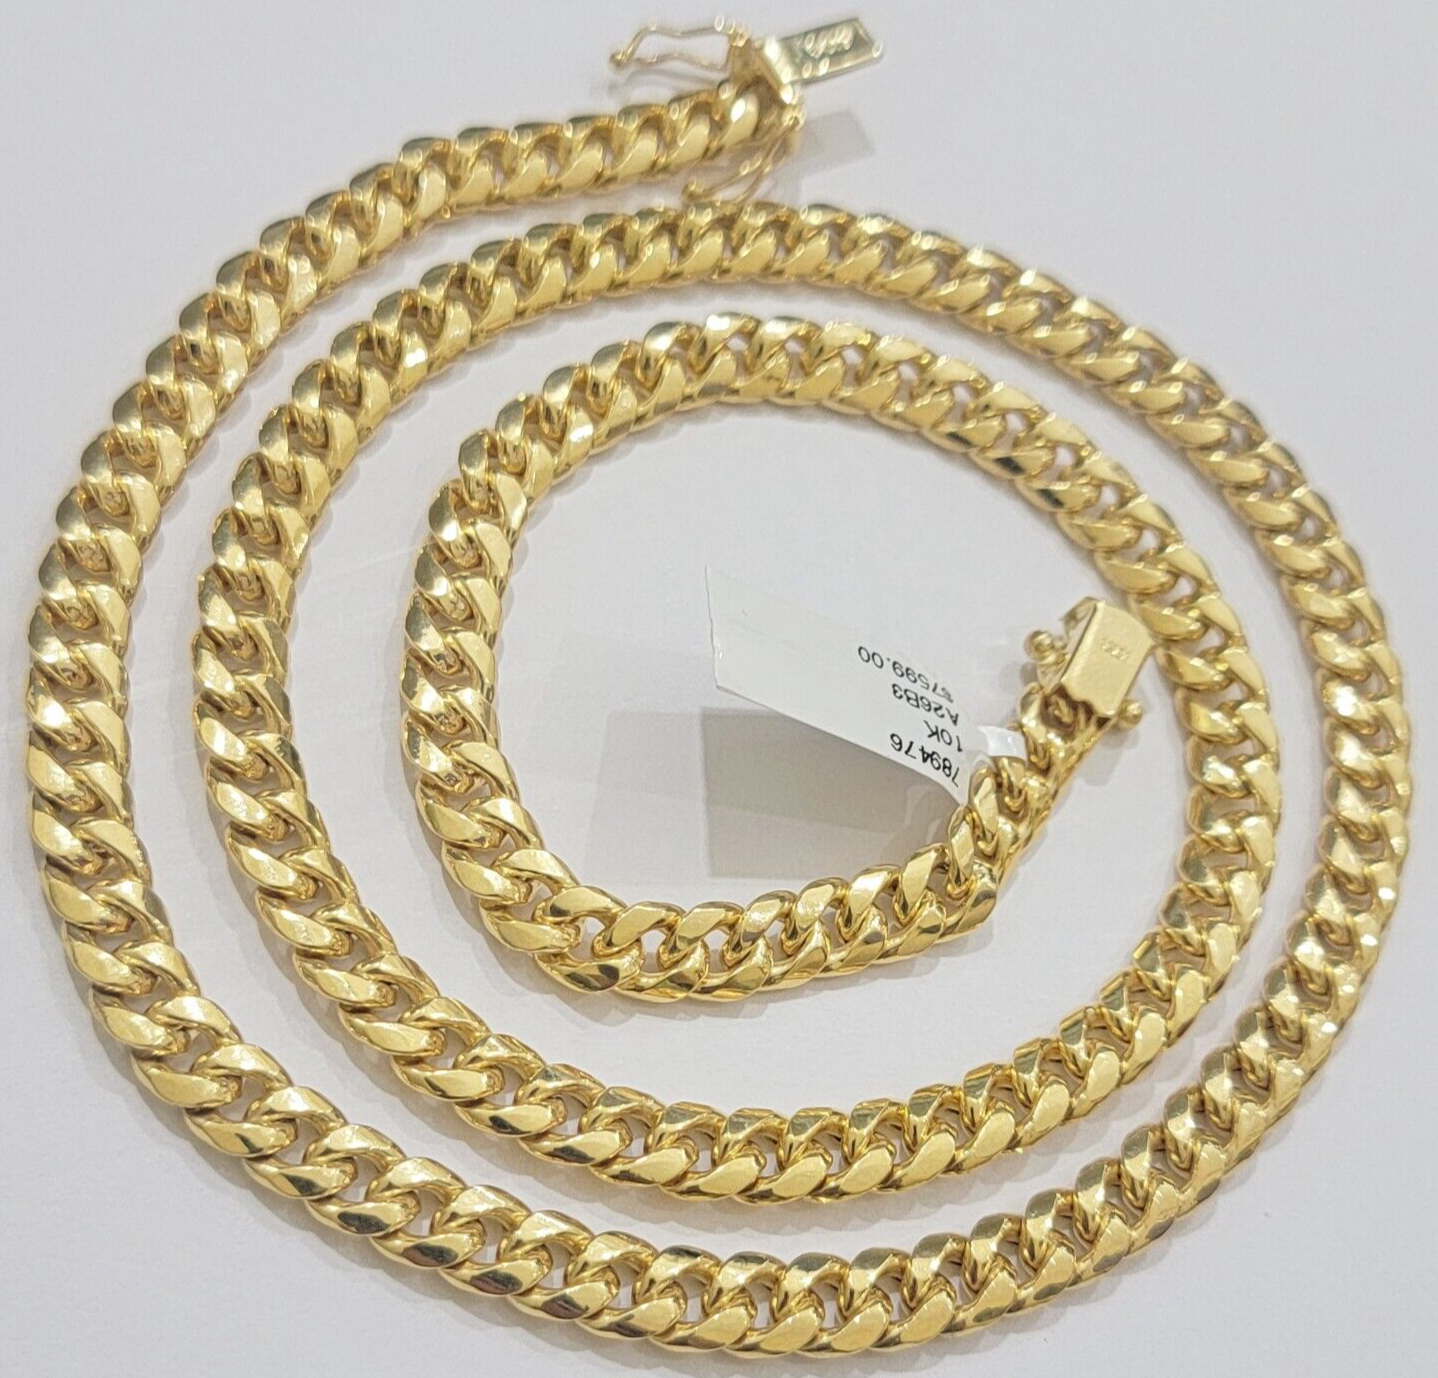 10k Gold Necklace 7mm 20 Inch Miami Cuban Link Chain REAL 10kt Yellow Gold Men's